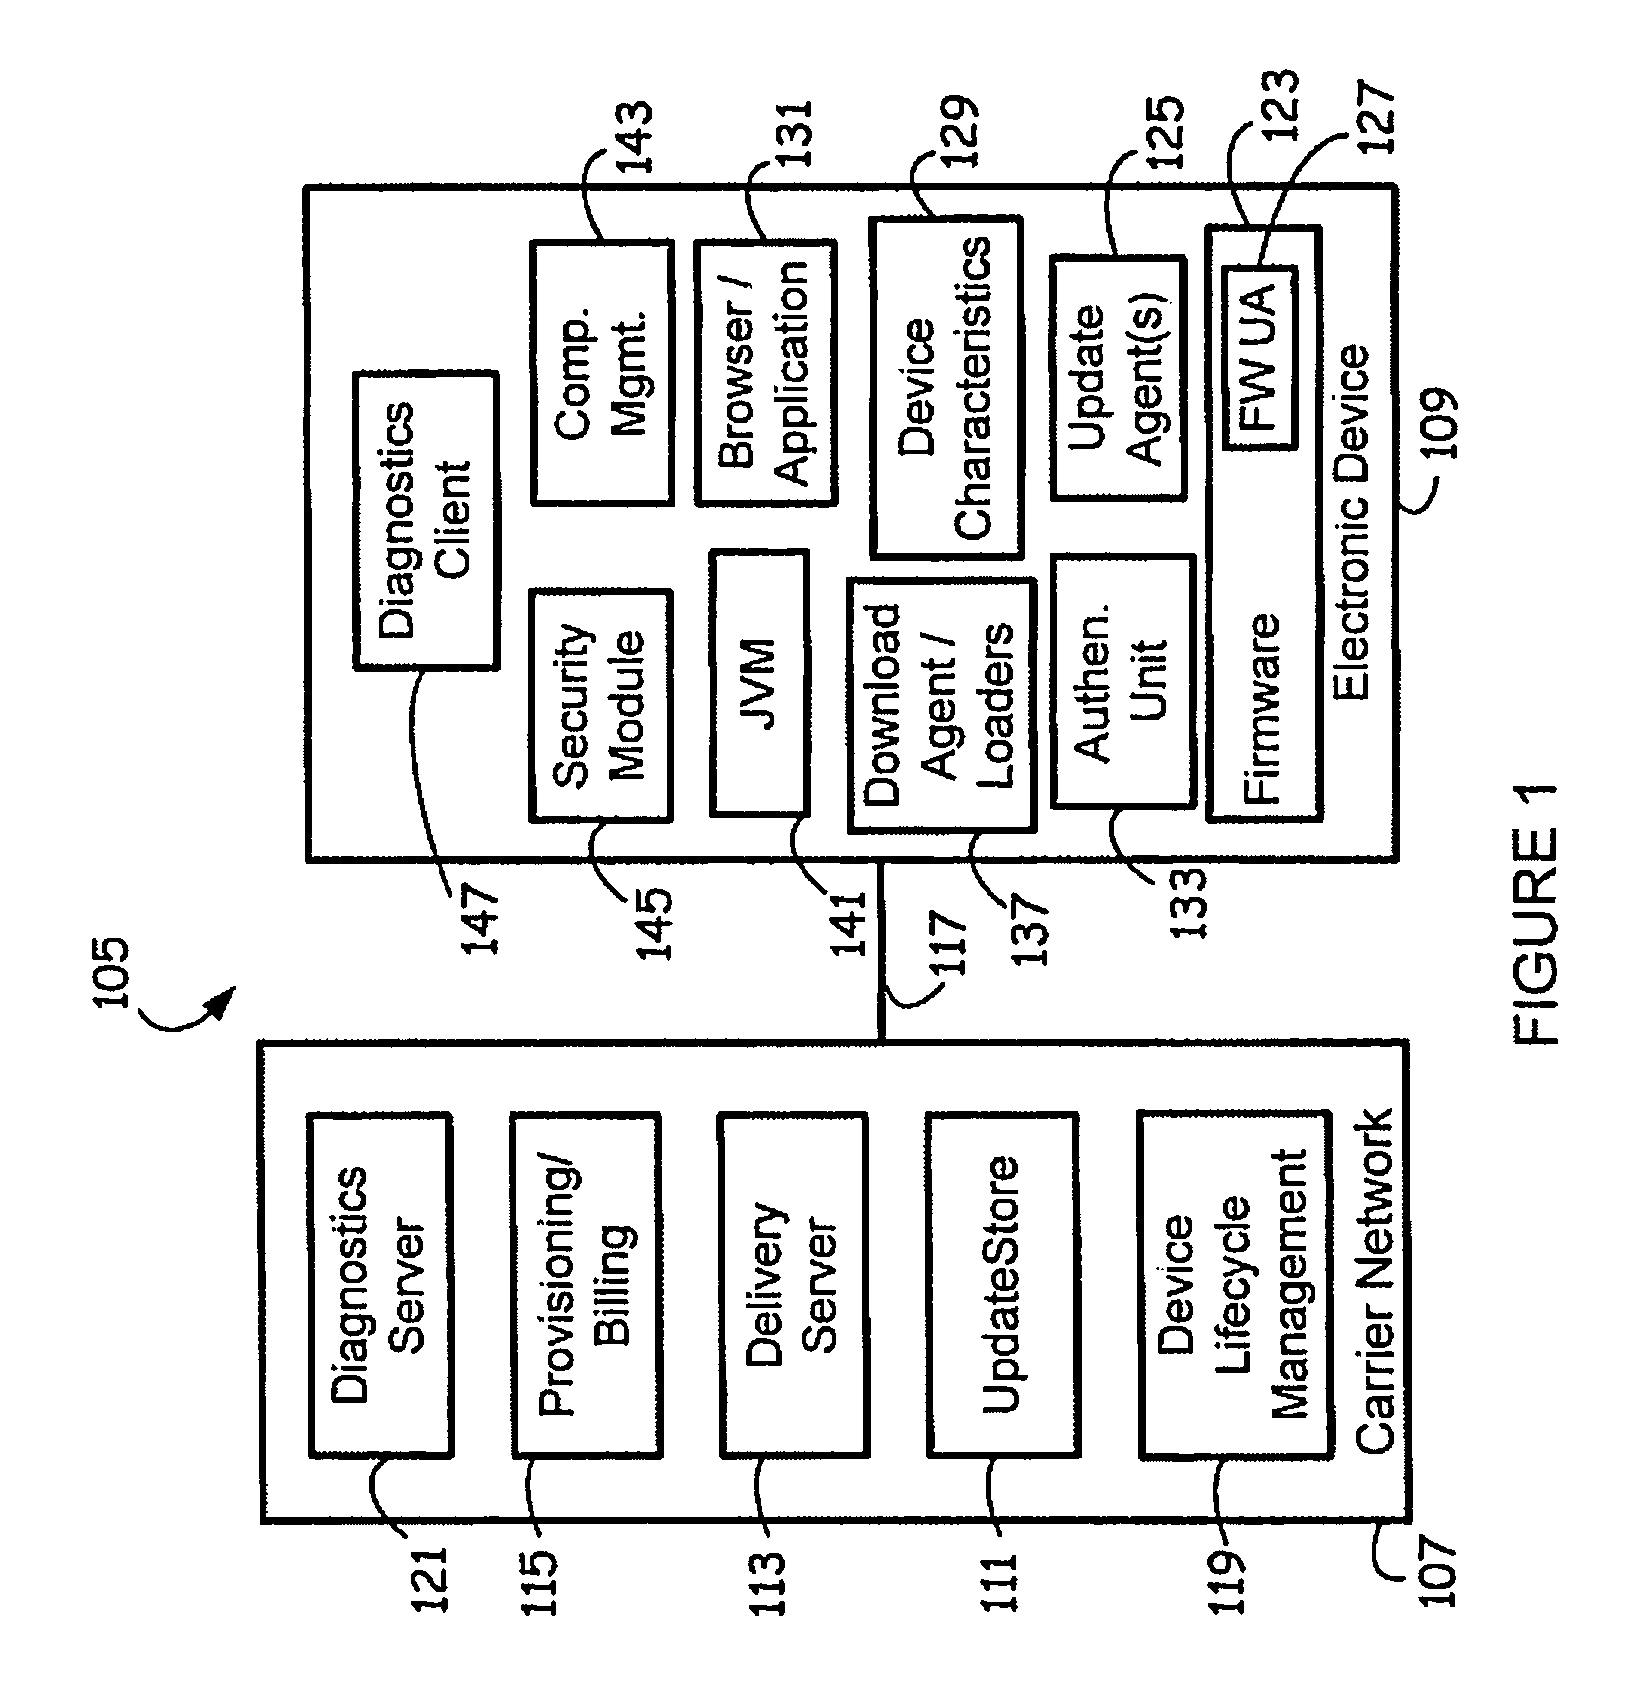 Network for lifecycle management of firmware and software in electronic devices